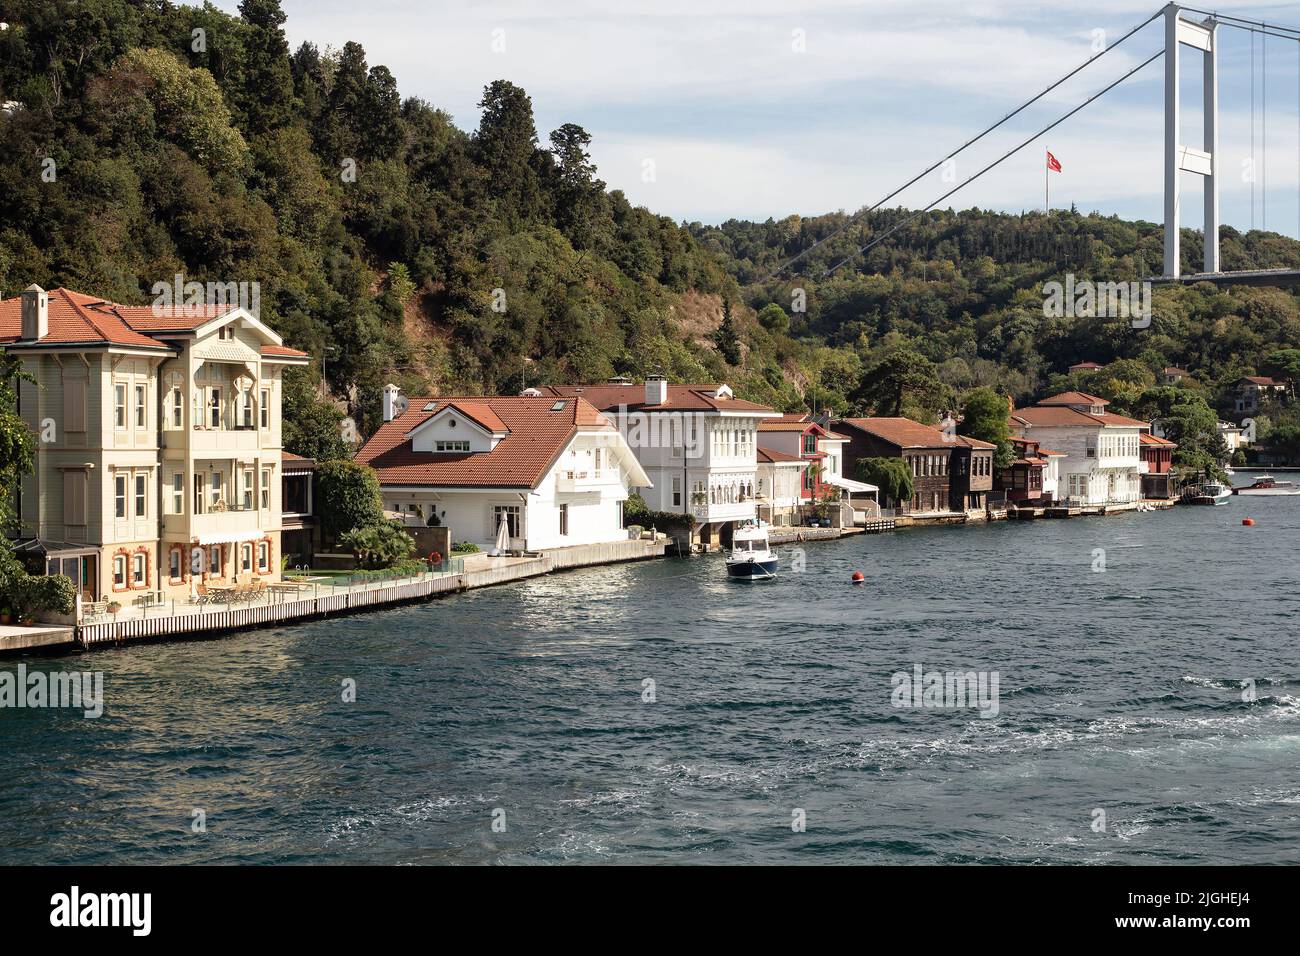 View of a small fishing boat, historical and traditional mansions by Bosphorus in Kanlica area of Asian side of Istanbul. It is a sunny summer day. Be Stock Photo